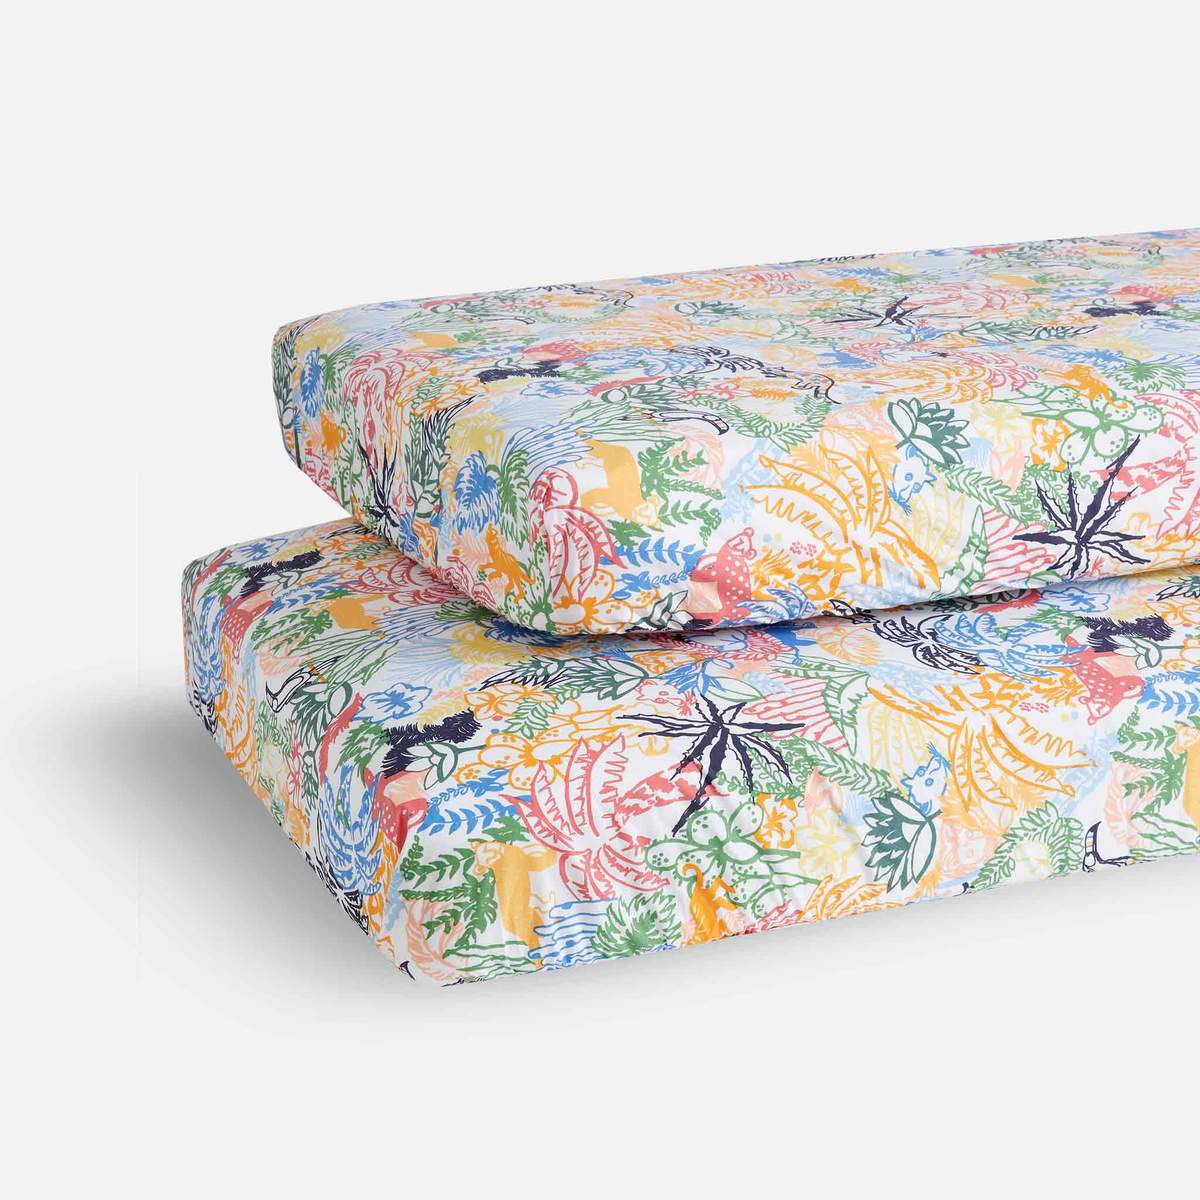 A New Baby Bedding Line Pulled From the World’s Largest Vintage Textile Library